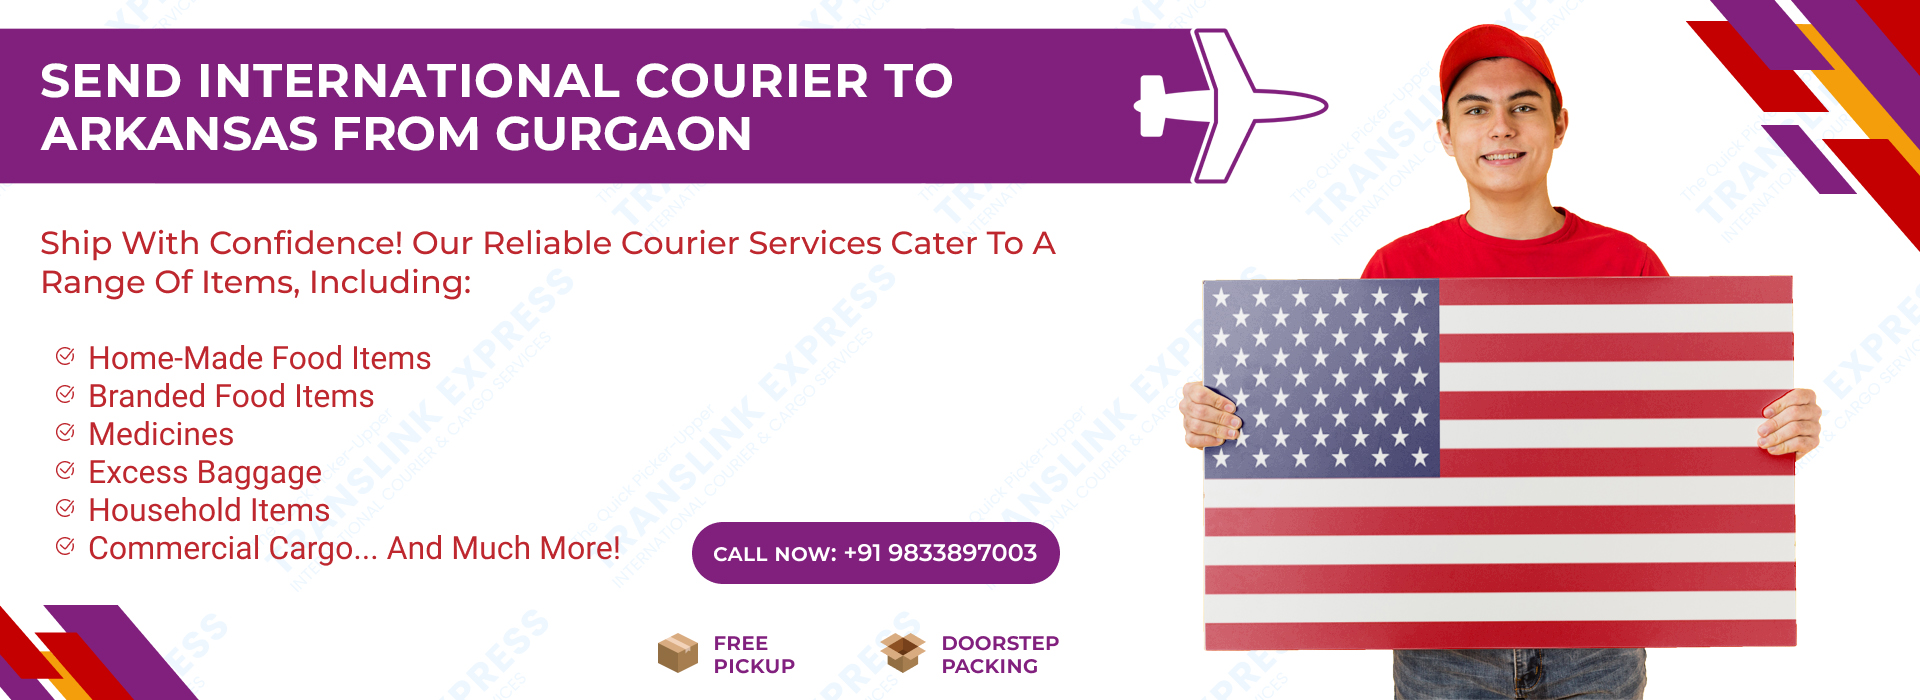 Courier to Arkansas From Gurgaon